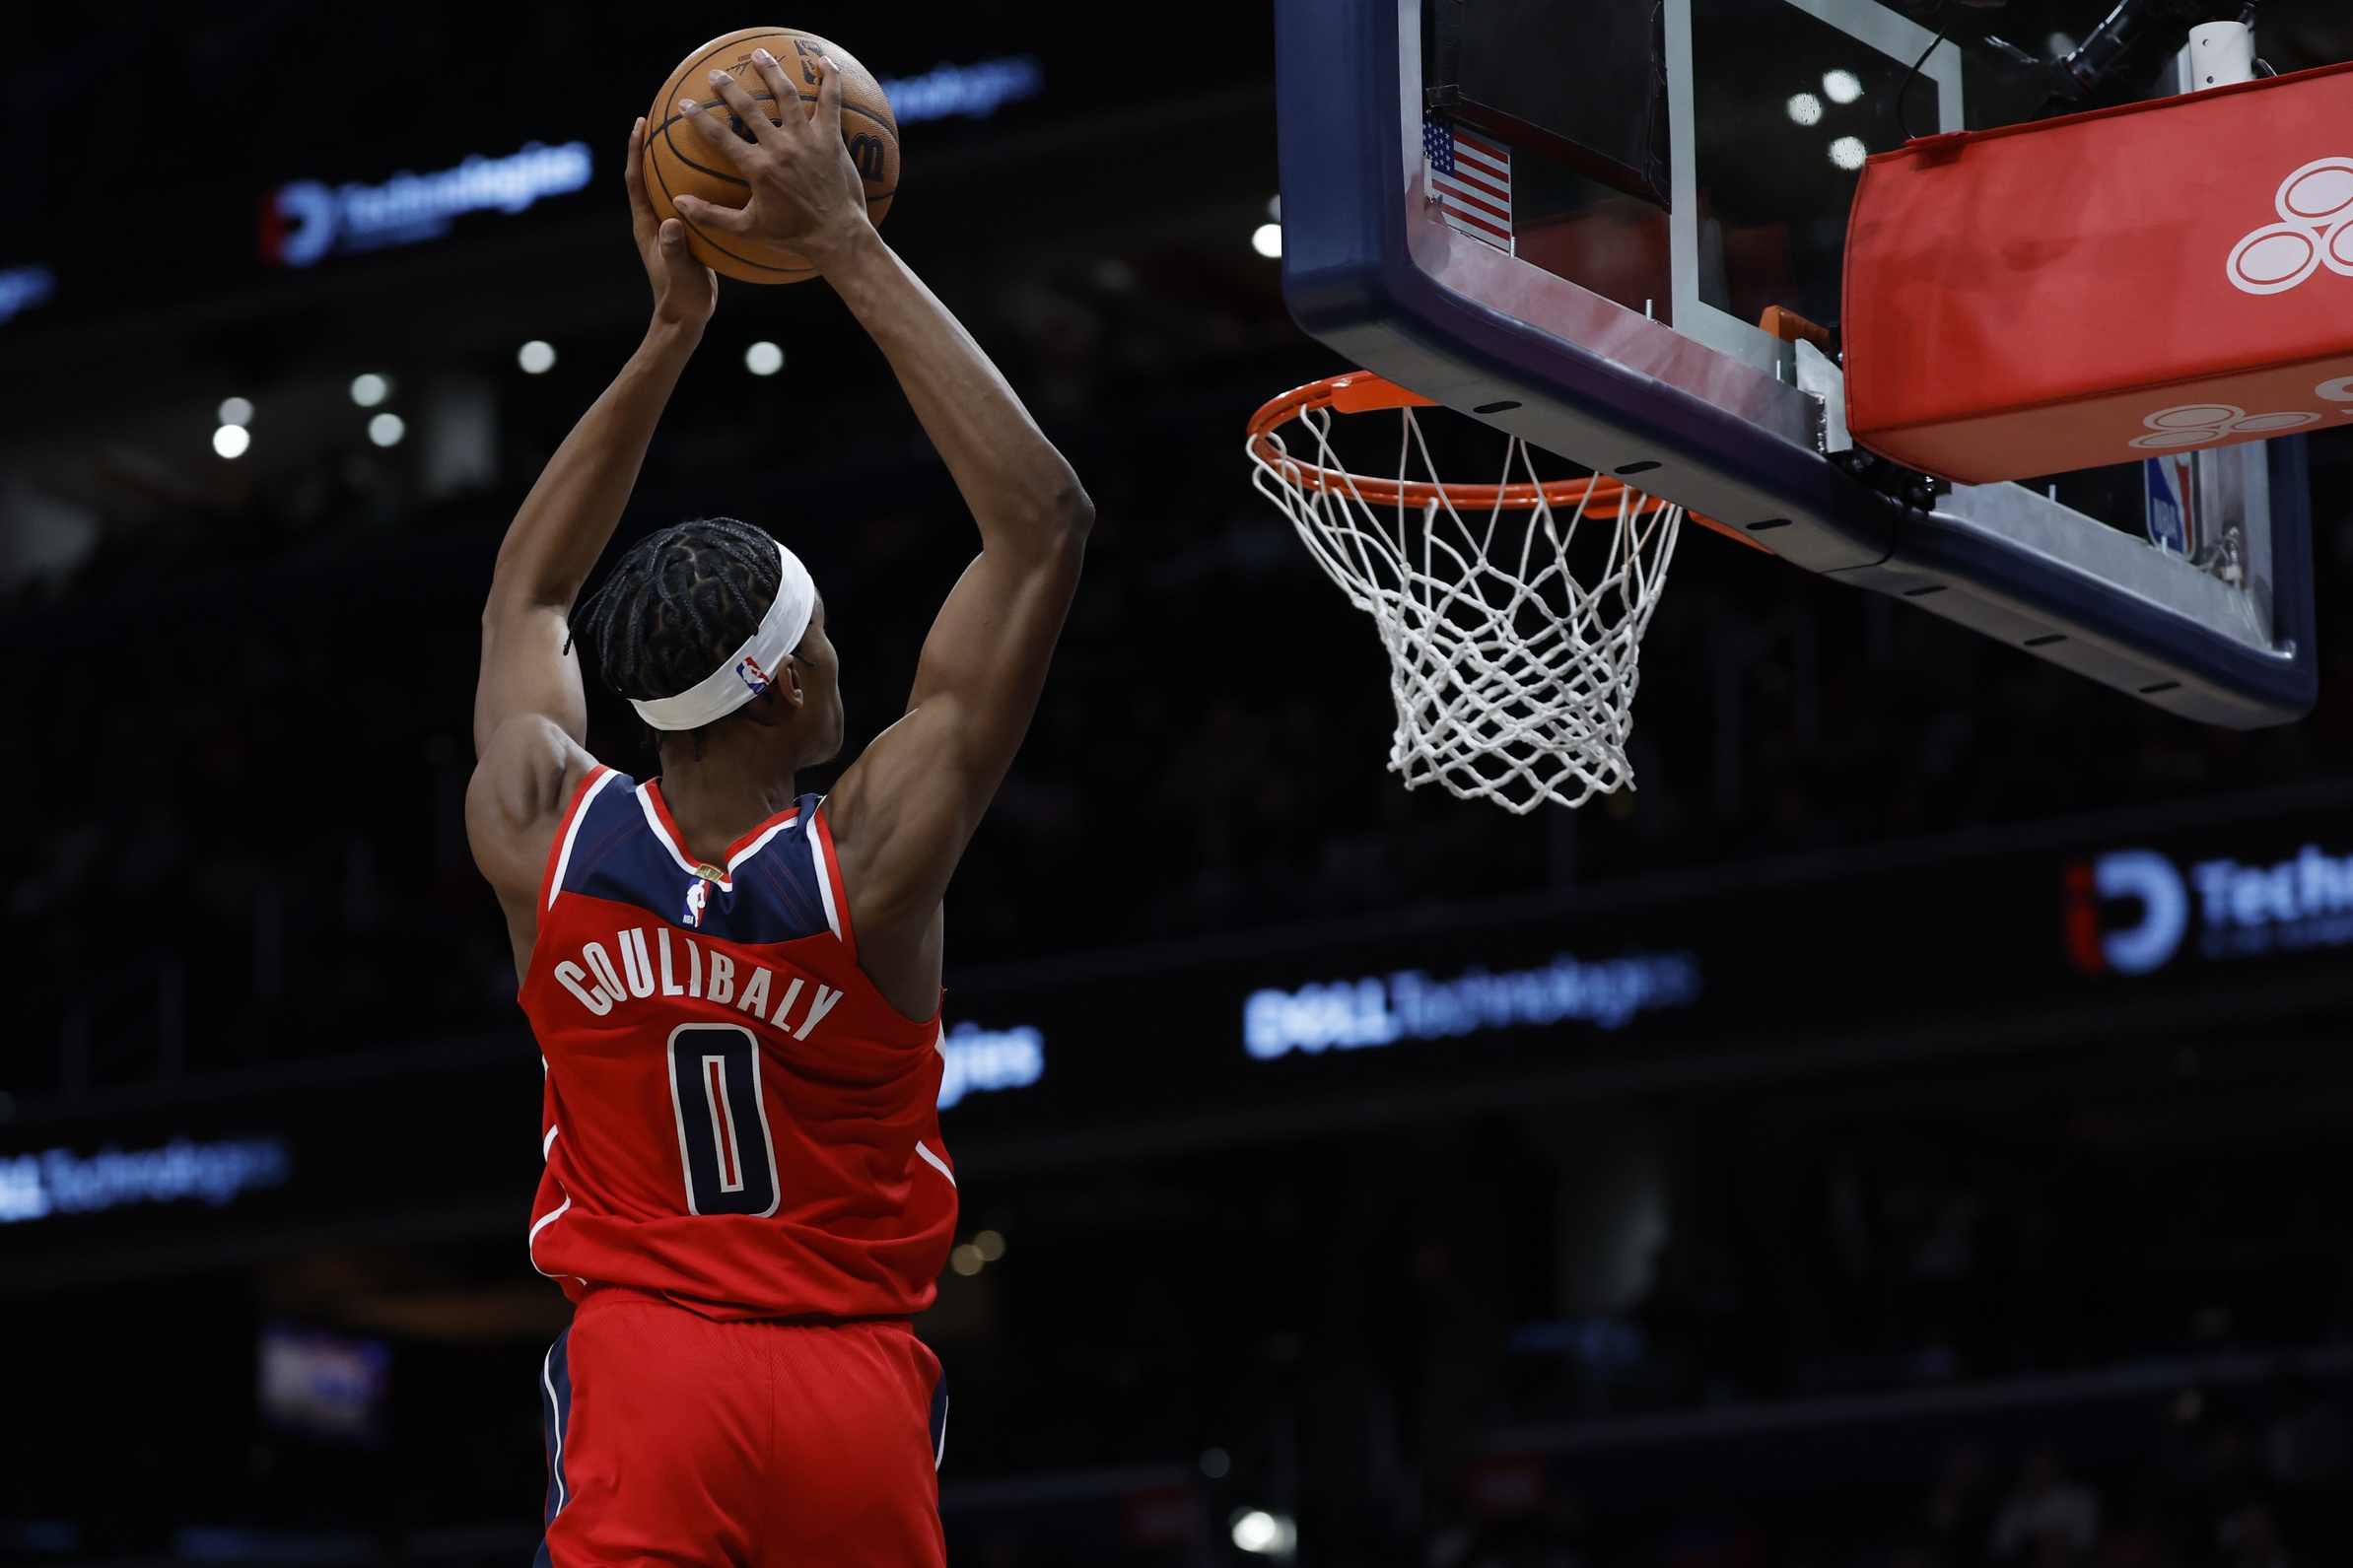 Washington Wizards guard Bilal Coulibaly (0) dunks the ball against the LA Clippers in the first half at Capital One Arena.